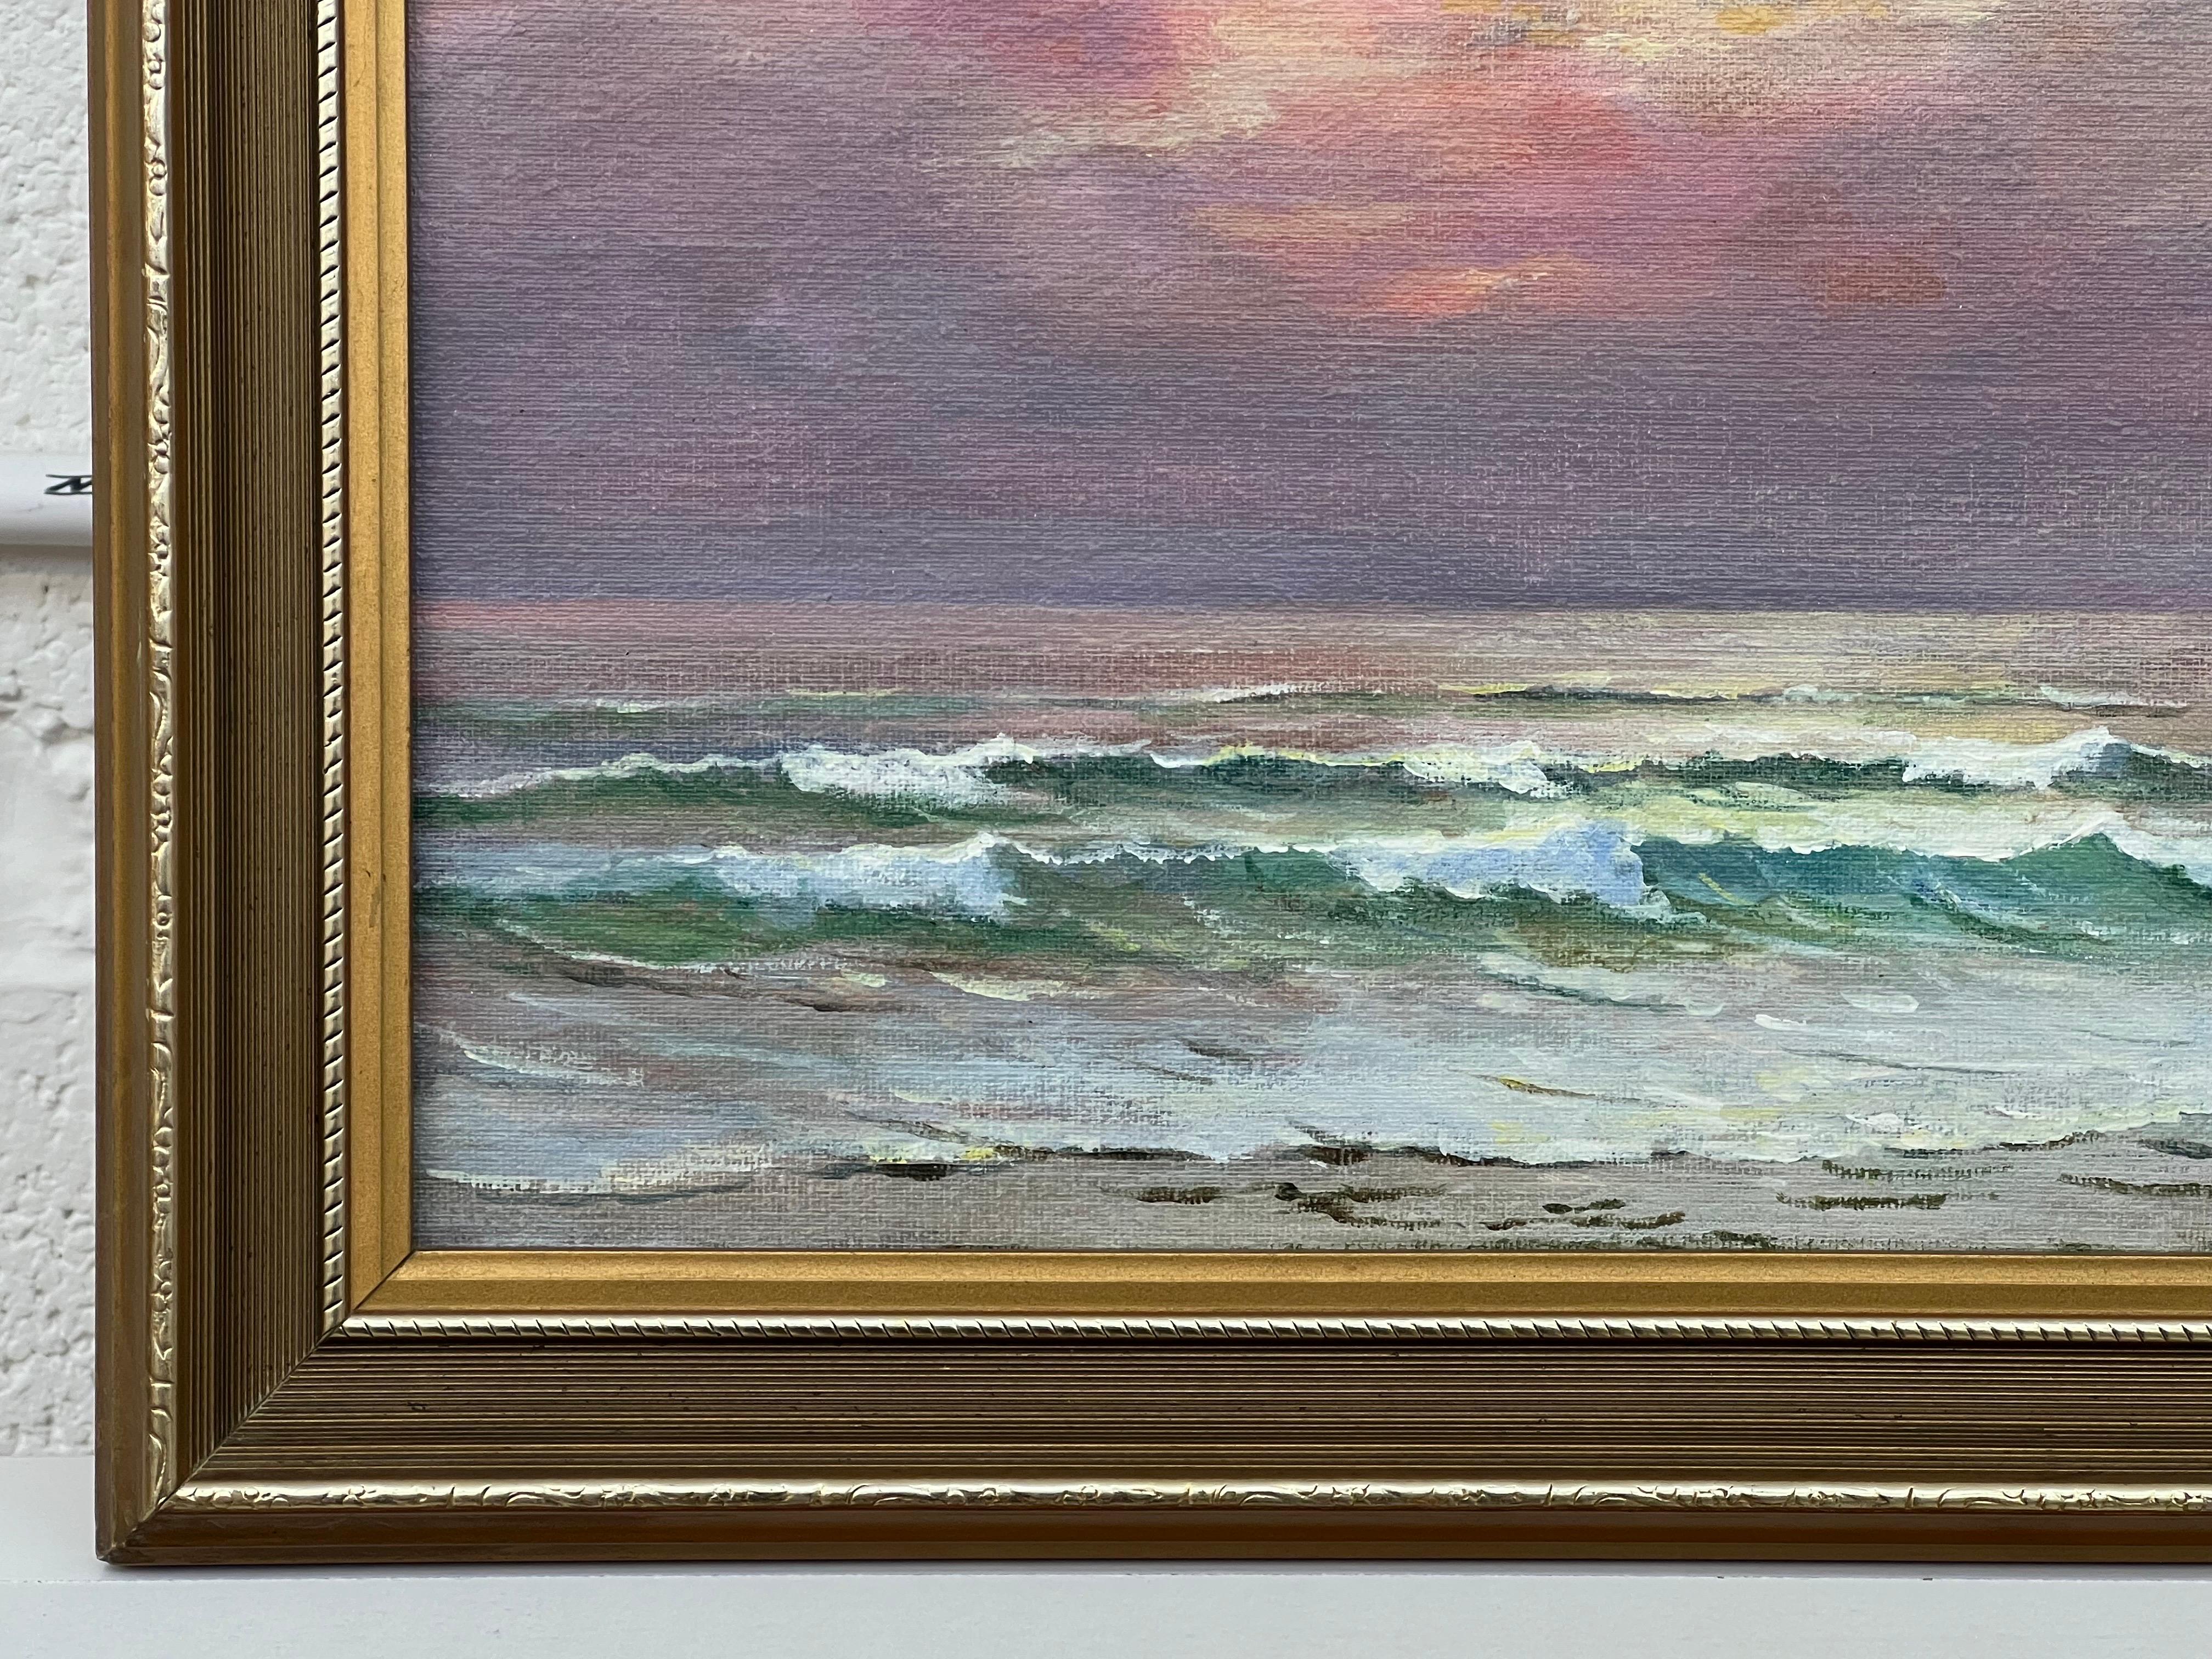 Dawn Seascape Painting with Pink Sky and Waves by 20th Century British Artist, Norman Scott

Art measures 16 x 12 inches 
Frame measures 18 x 14 inches 

Vintage Original Oil on Board using a pastel colour palette of light blue, white, pink, lilac &